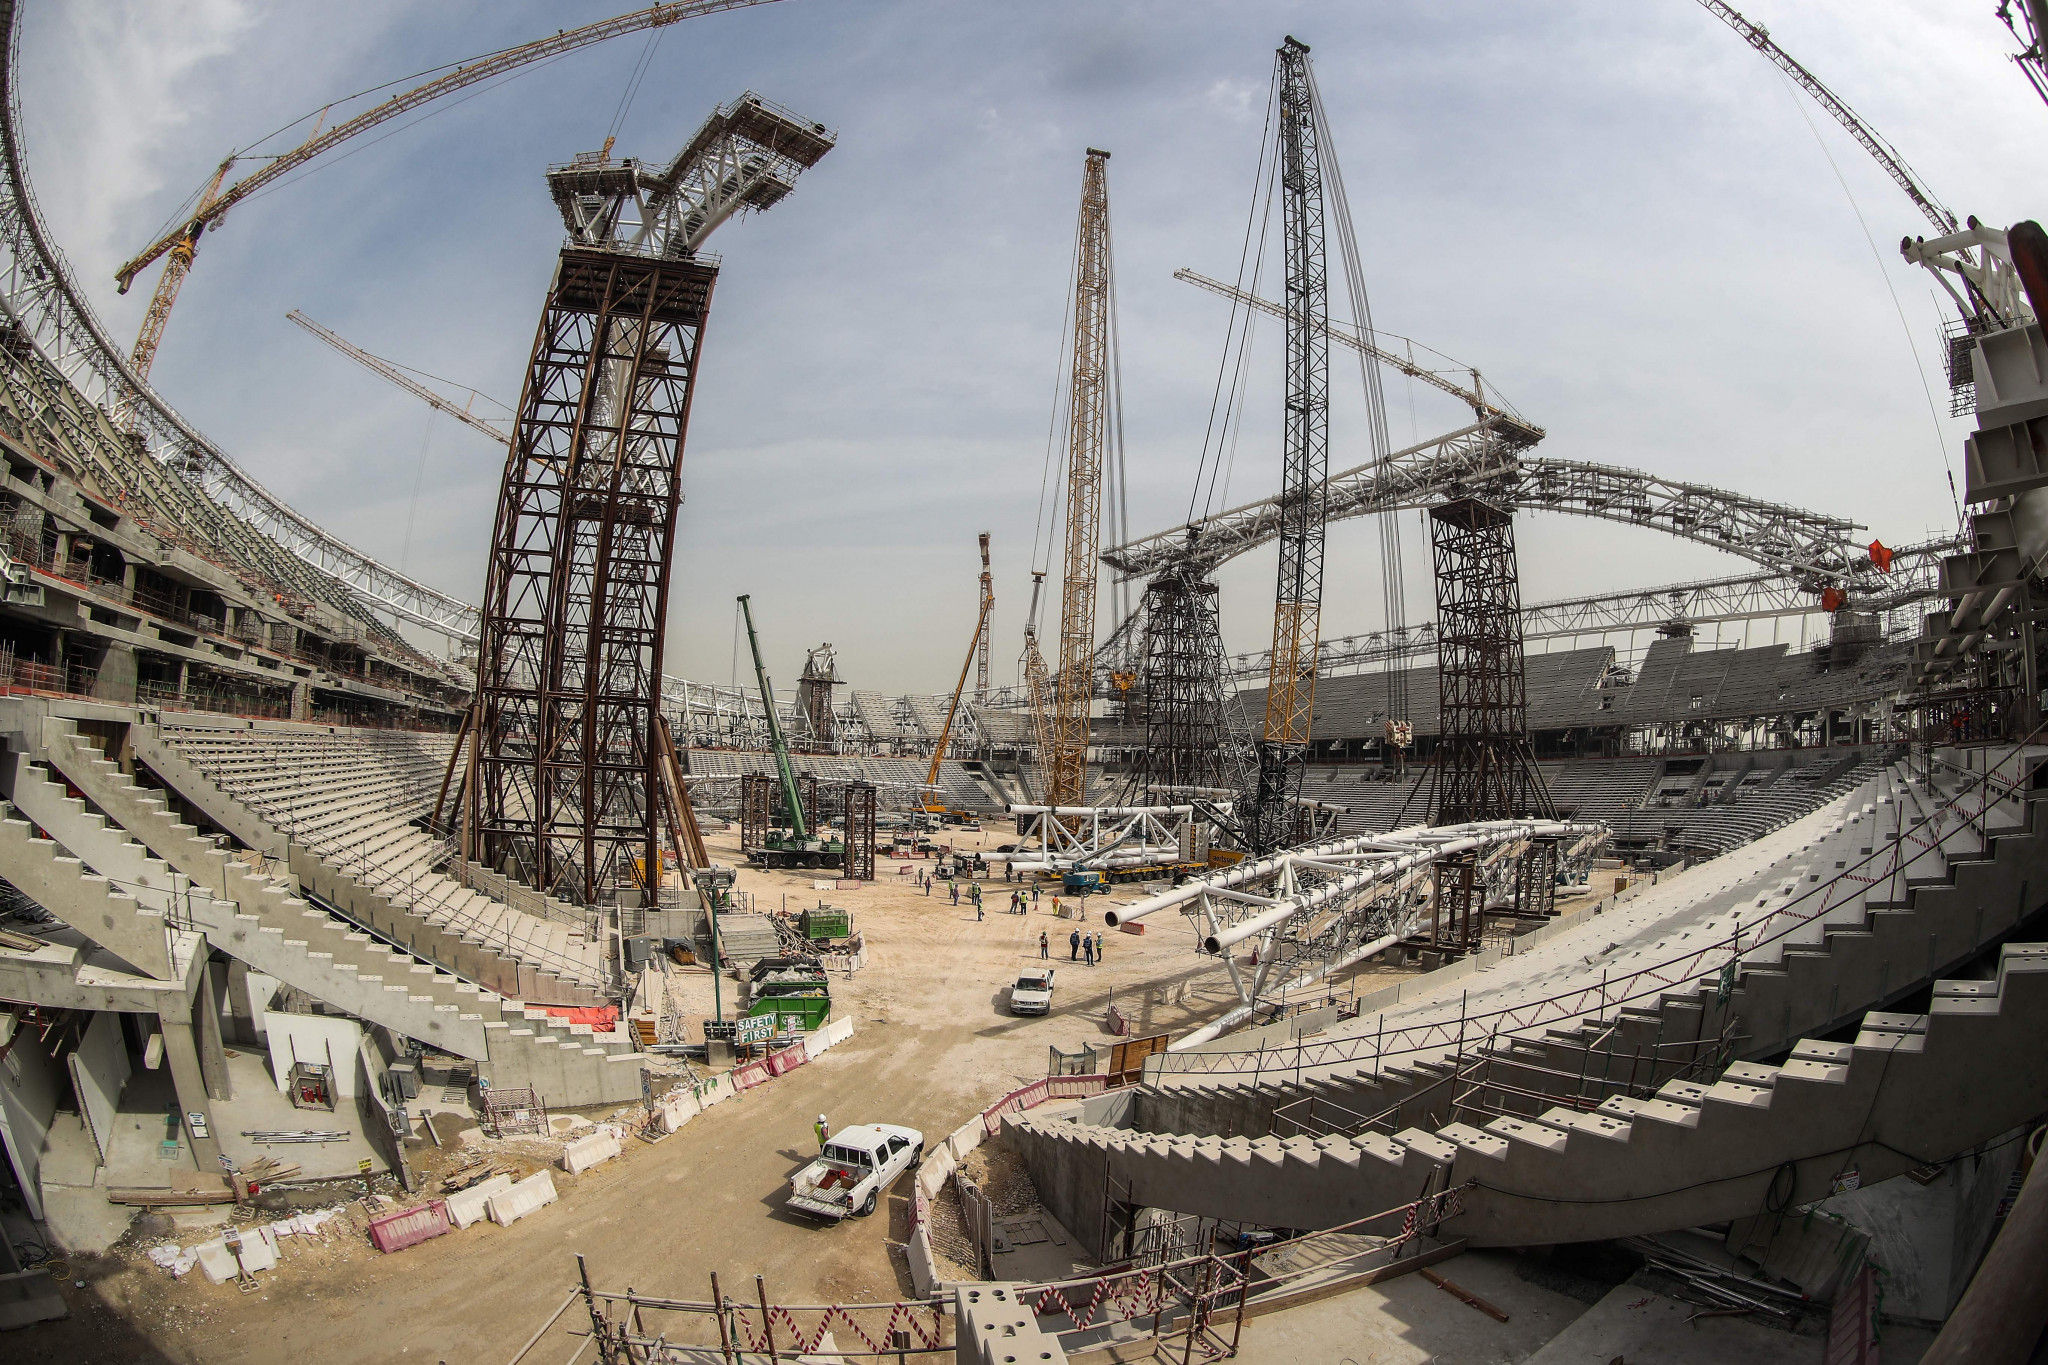 Qatar's treatment of migrant workers is among the issues being scrutinised in the build-up to this year's FIFA World Cup ©Getty Images